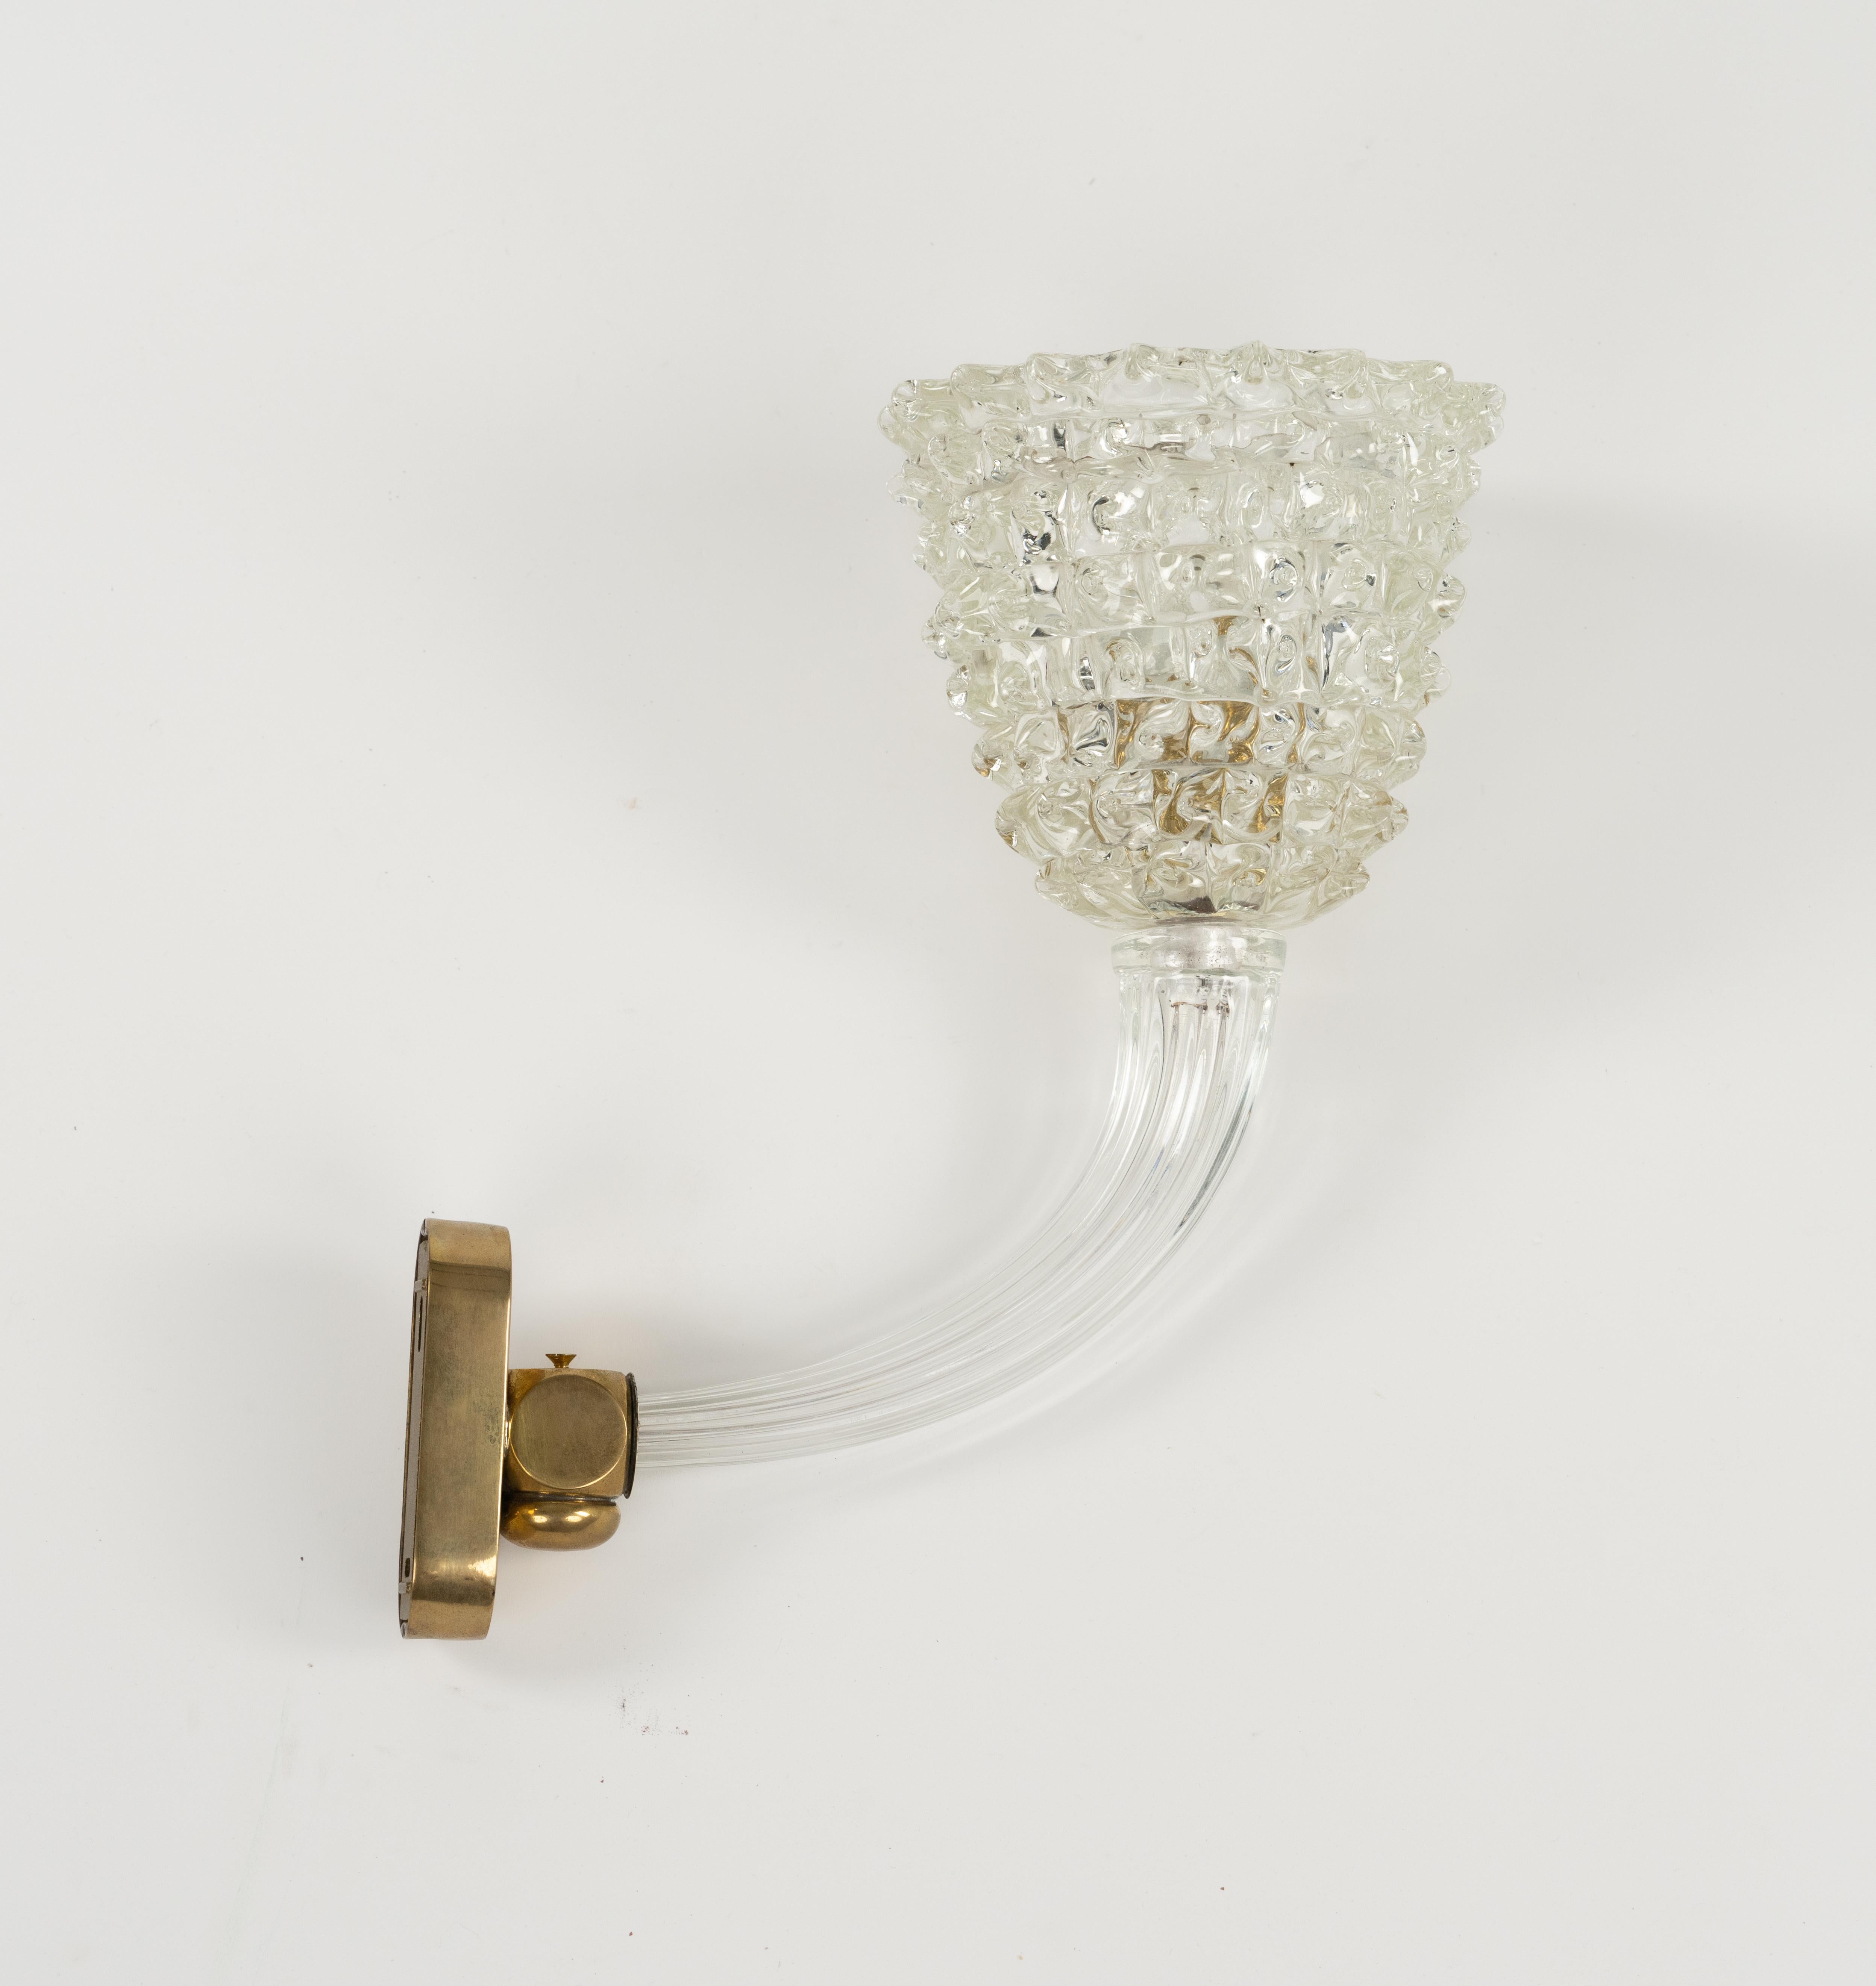 Pair of Sconces Rostrato Murano Glass & Brass Barovier & Toso Style, Italy 1950s For Sale 1